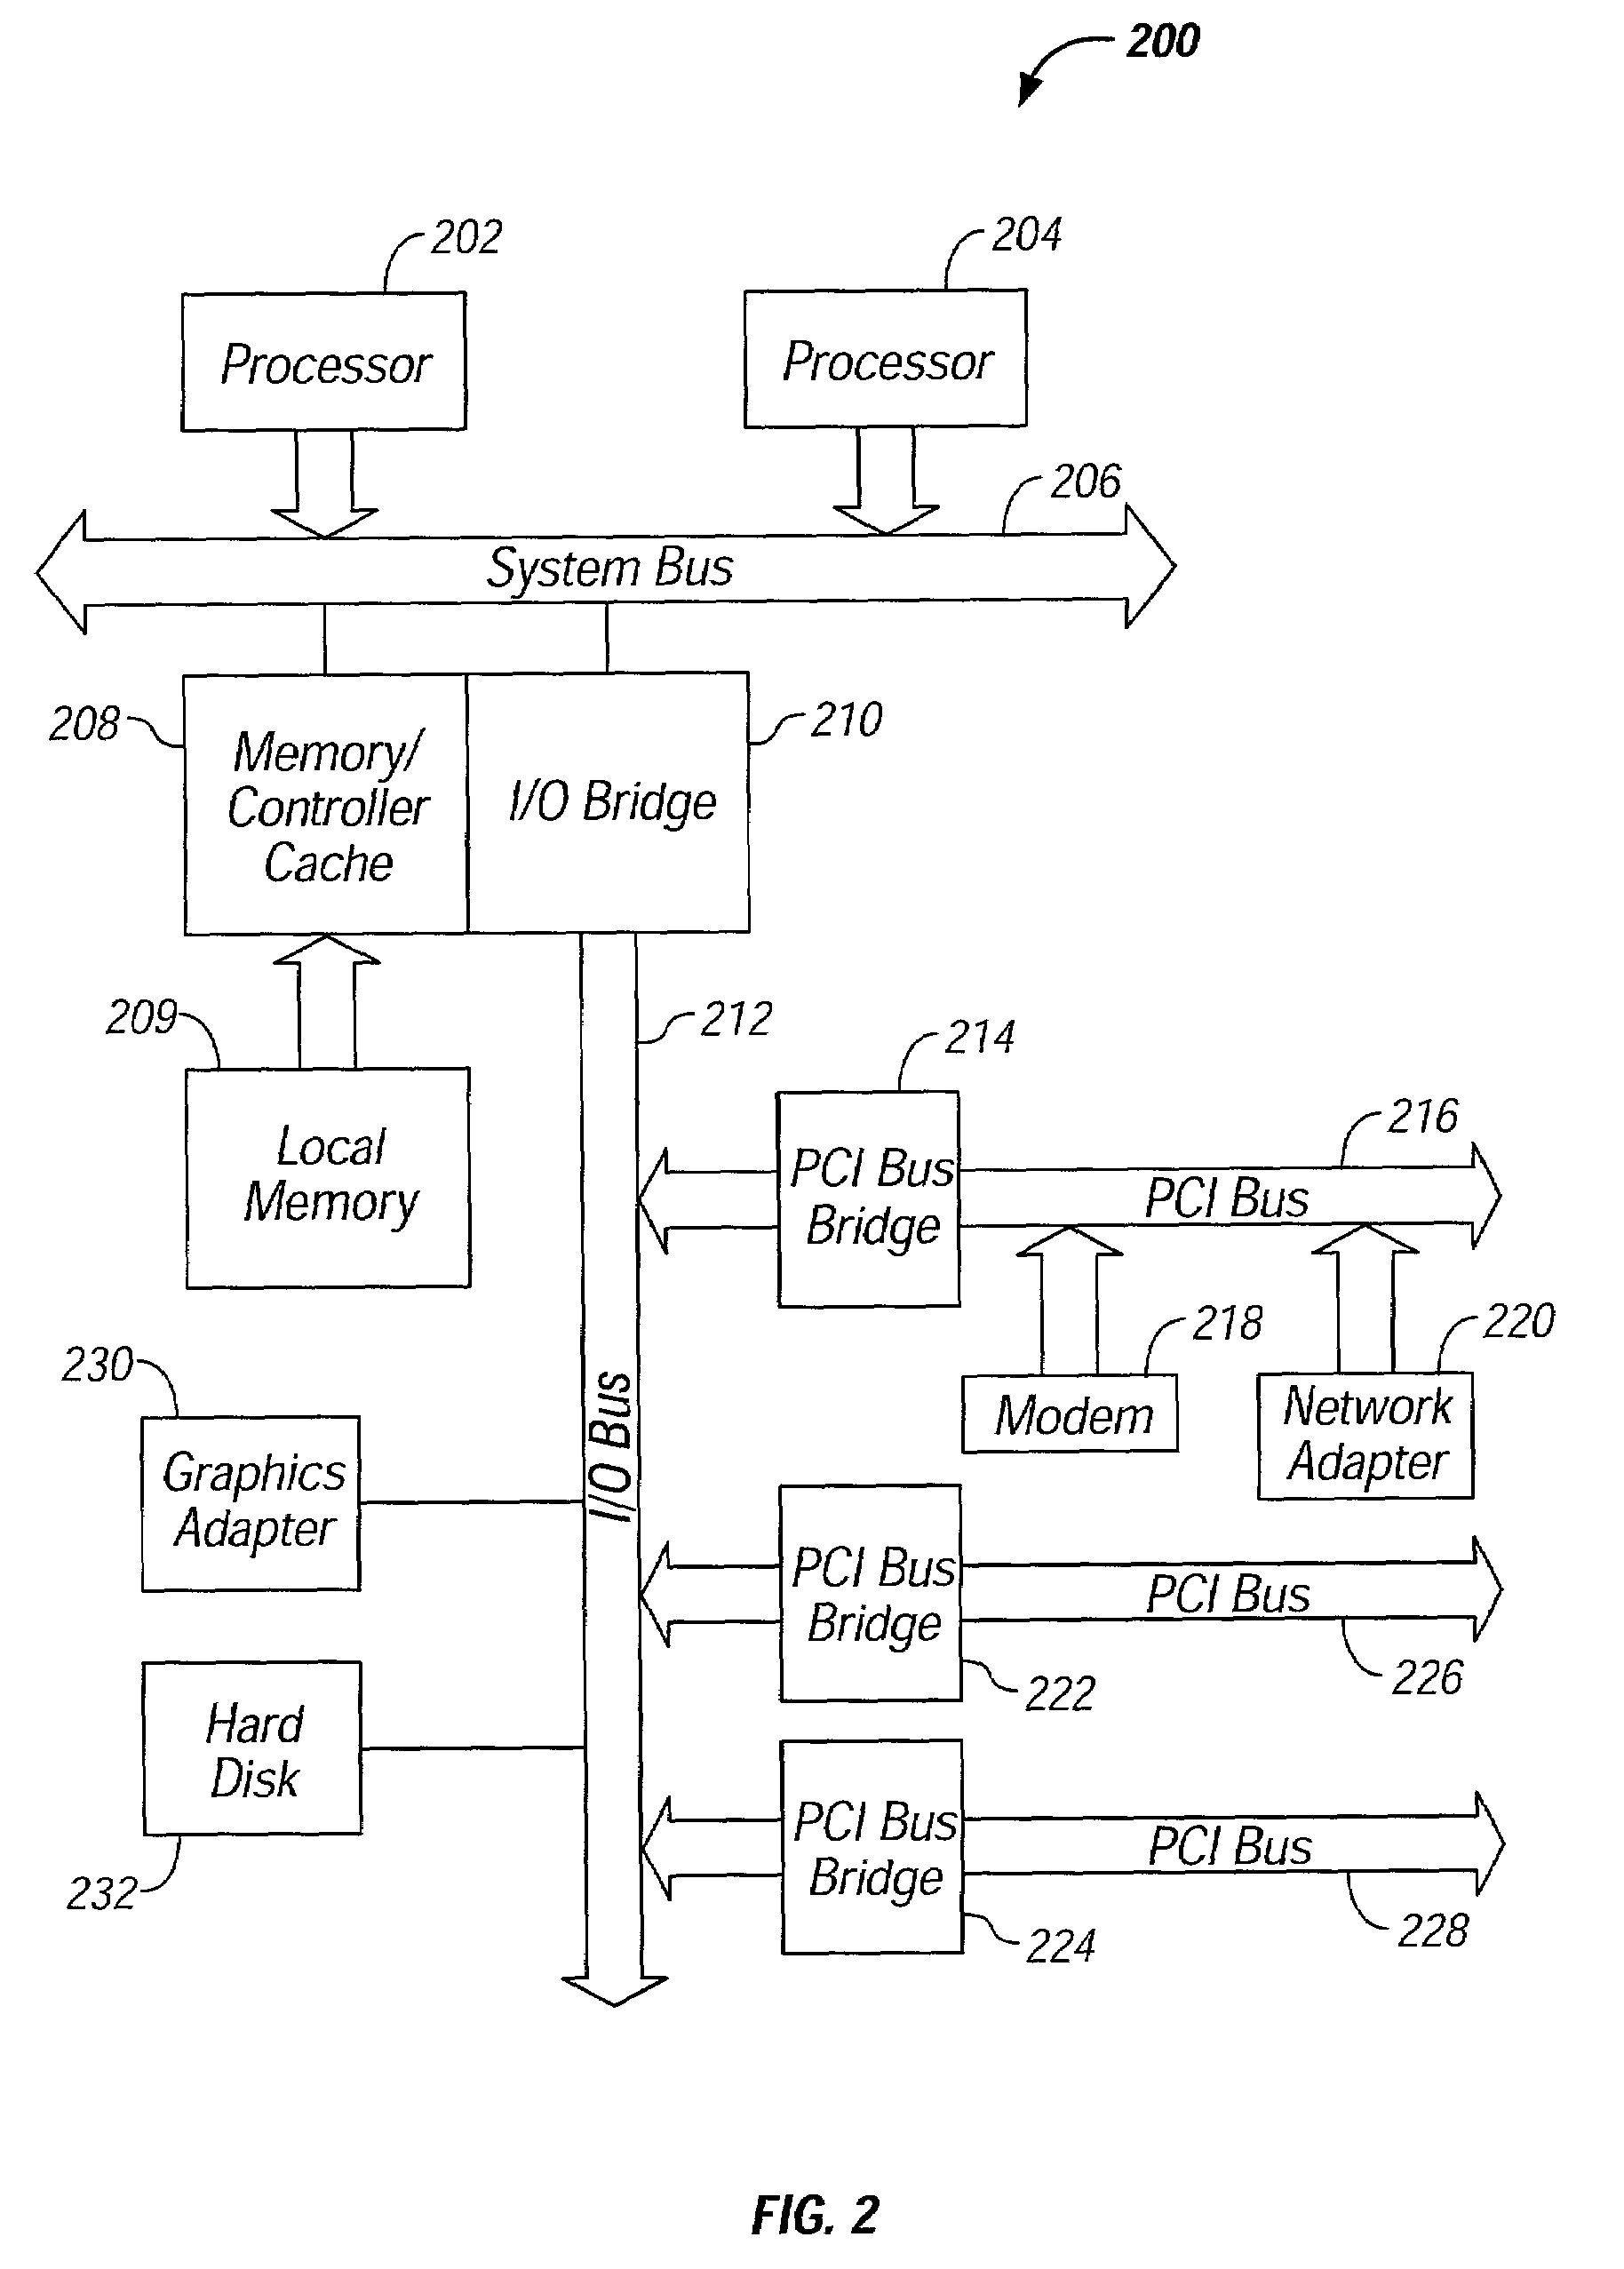 High availability system for network elements